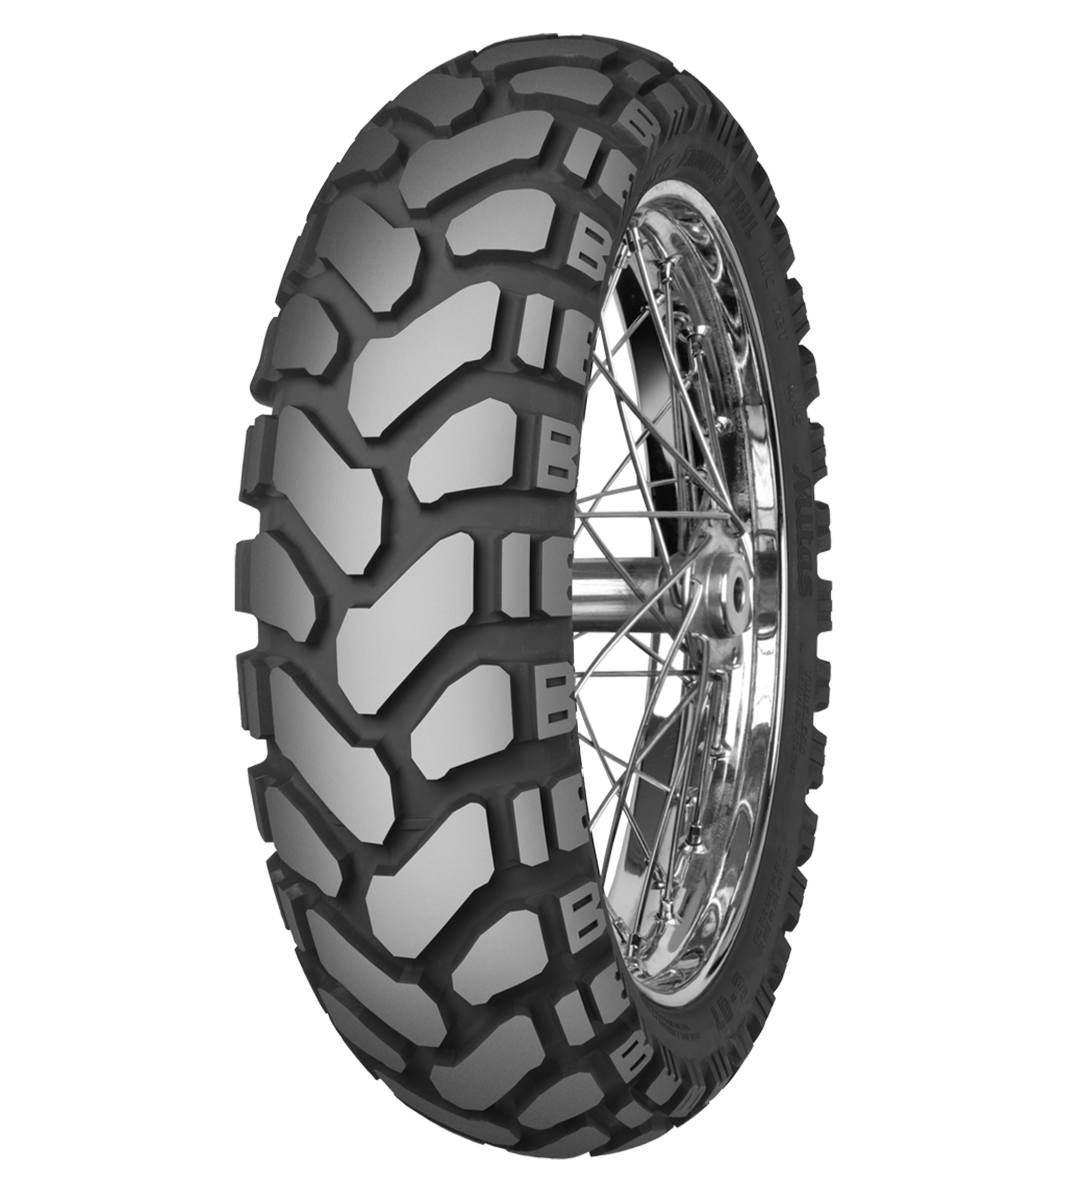 Mitas E-07+ ENDURO TRAIL 130/80B17 Trail ON Trail 65T No Stripe Tubeless Rear Tire, 224135, 130/80B17, Adventure Touring, E Series, E-07+ Enduro Trail, Rear, Trail, Trail ON, Tires - Imported and distributed in North &amp; South America by Lindeco Genuine Powersports - Premier Powersports Equipment and Accessories for Motorcycle Enthusiasts, Professional Riders and Dealers.